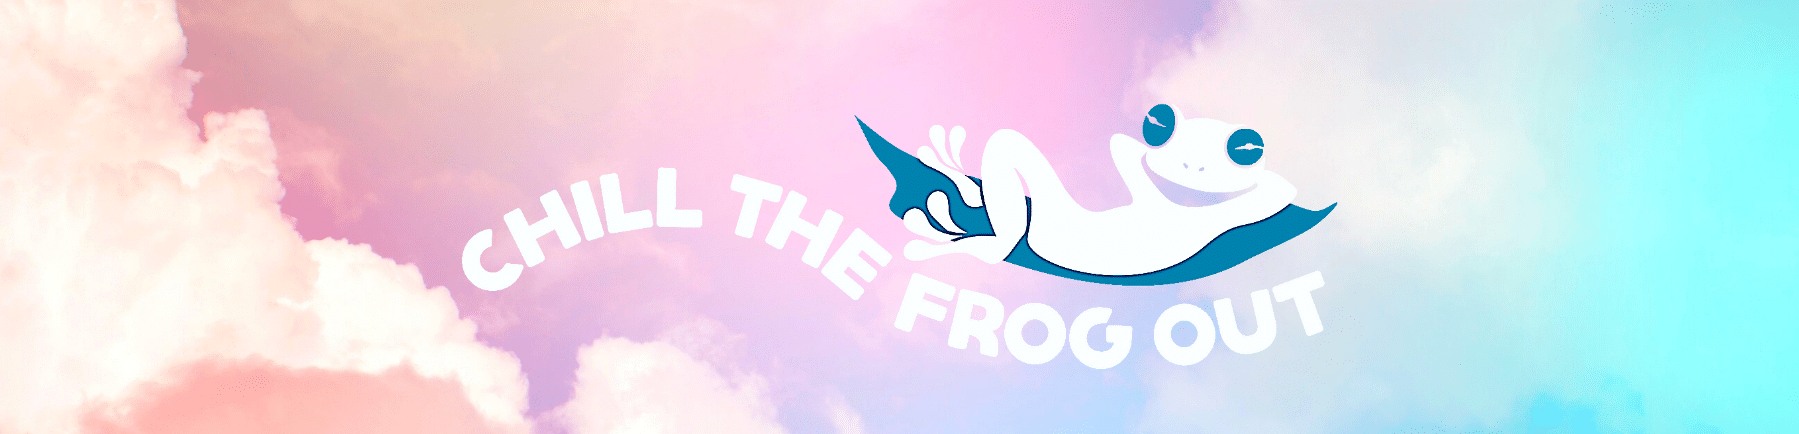 Chill Frog CBD Review & Coupon